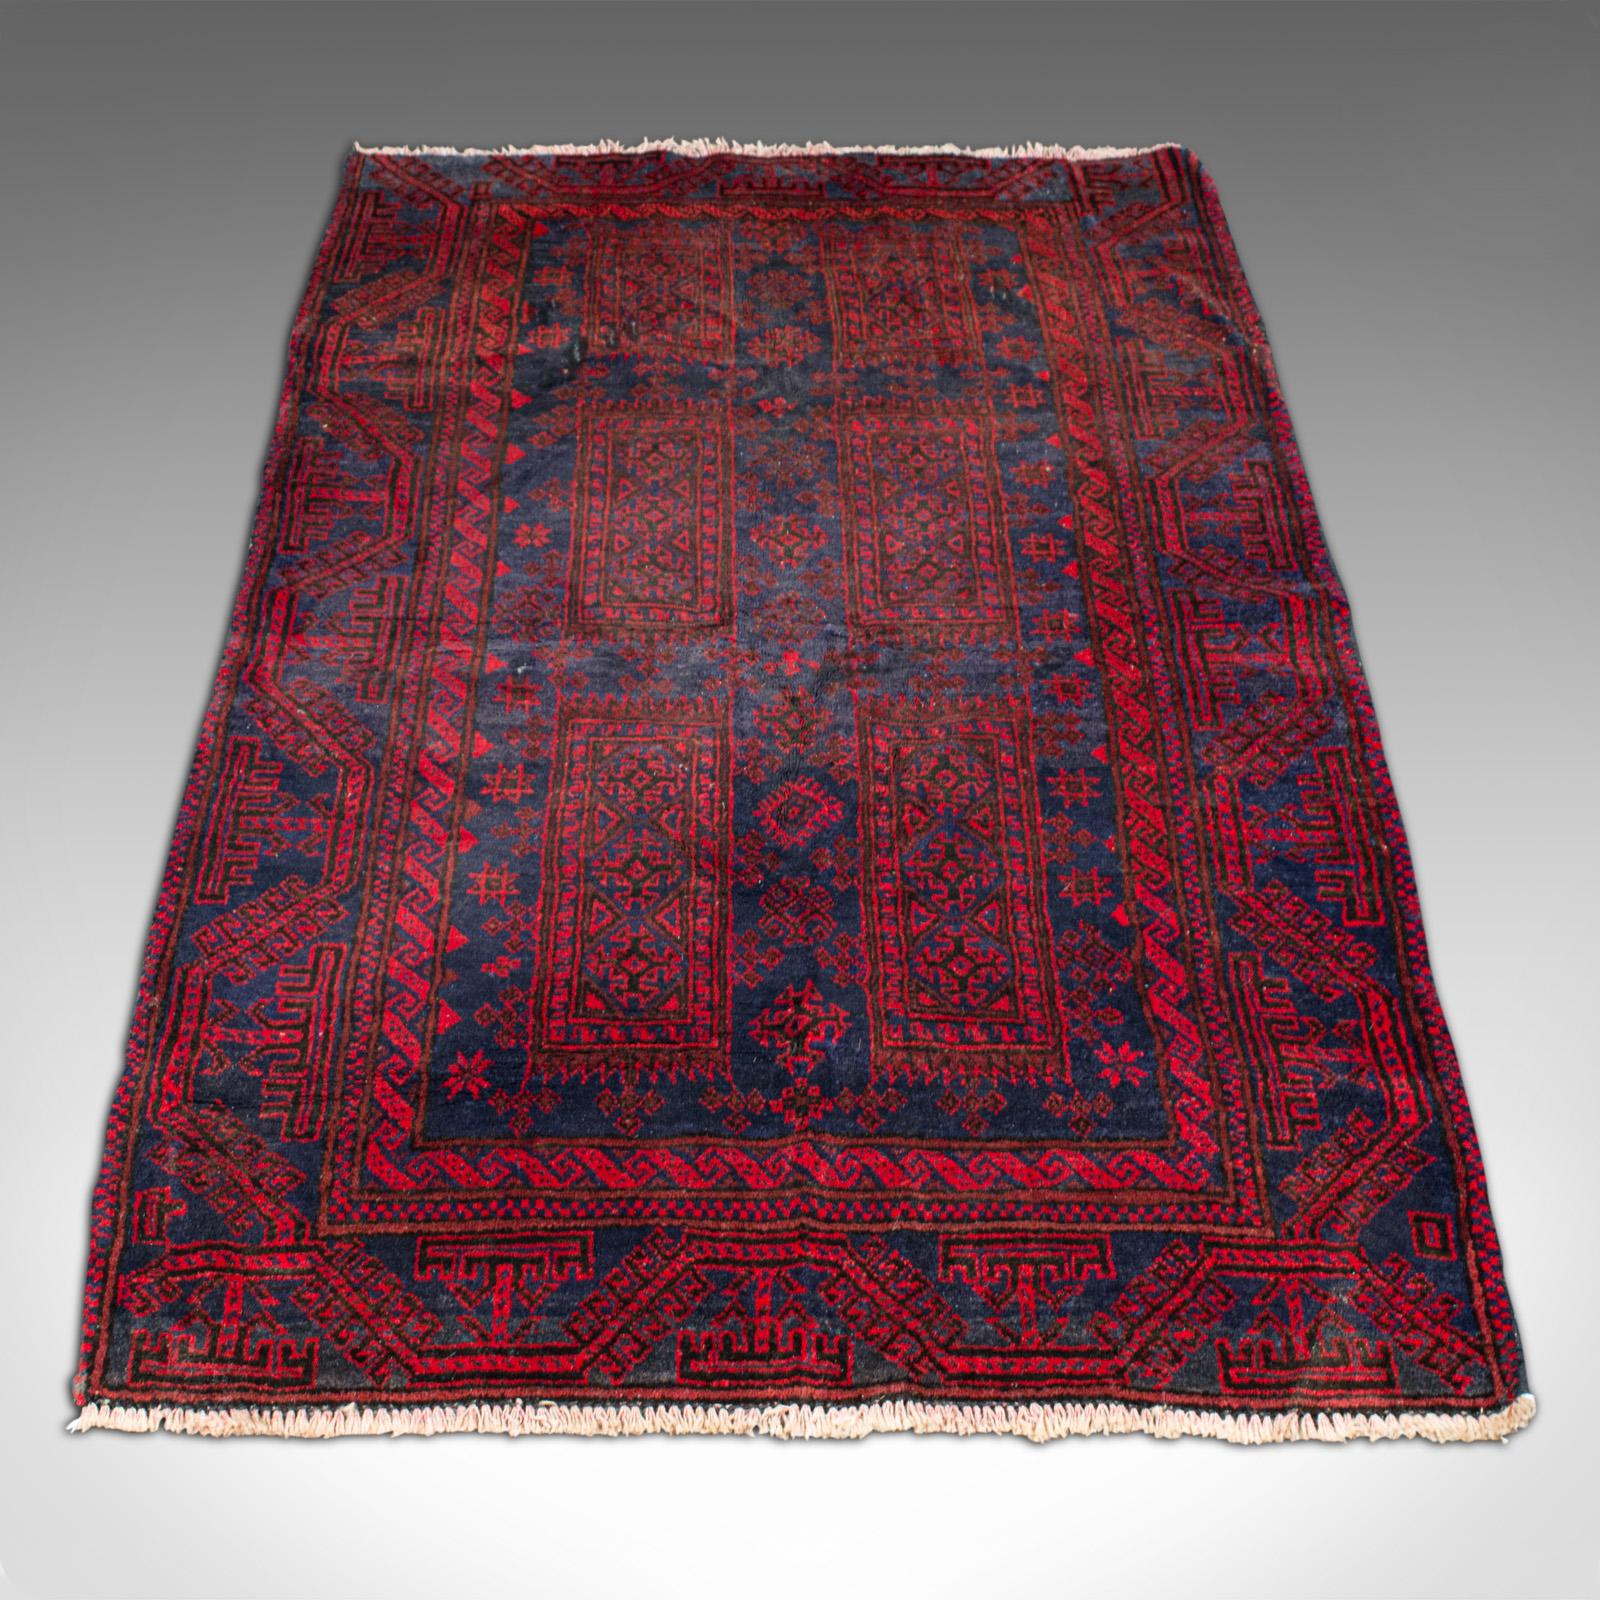 This is a vintage decorative Baluchi rug. A Middle Eastern, hand-woven hall or lounge carpet, dating to the early 20th century, circa 1930.

Of useful size for the doorway or beneath the coffee table at 93cm x 155.5cm (36.5